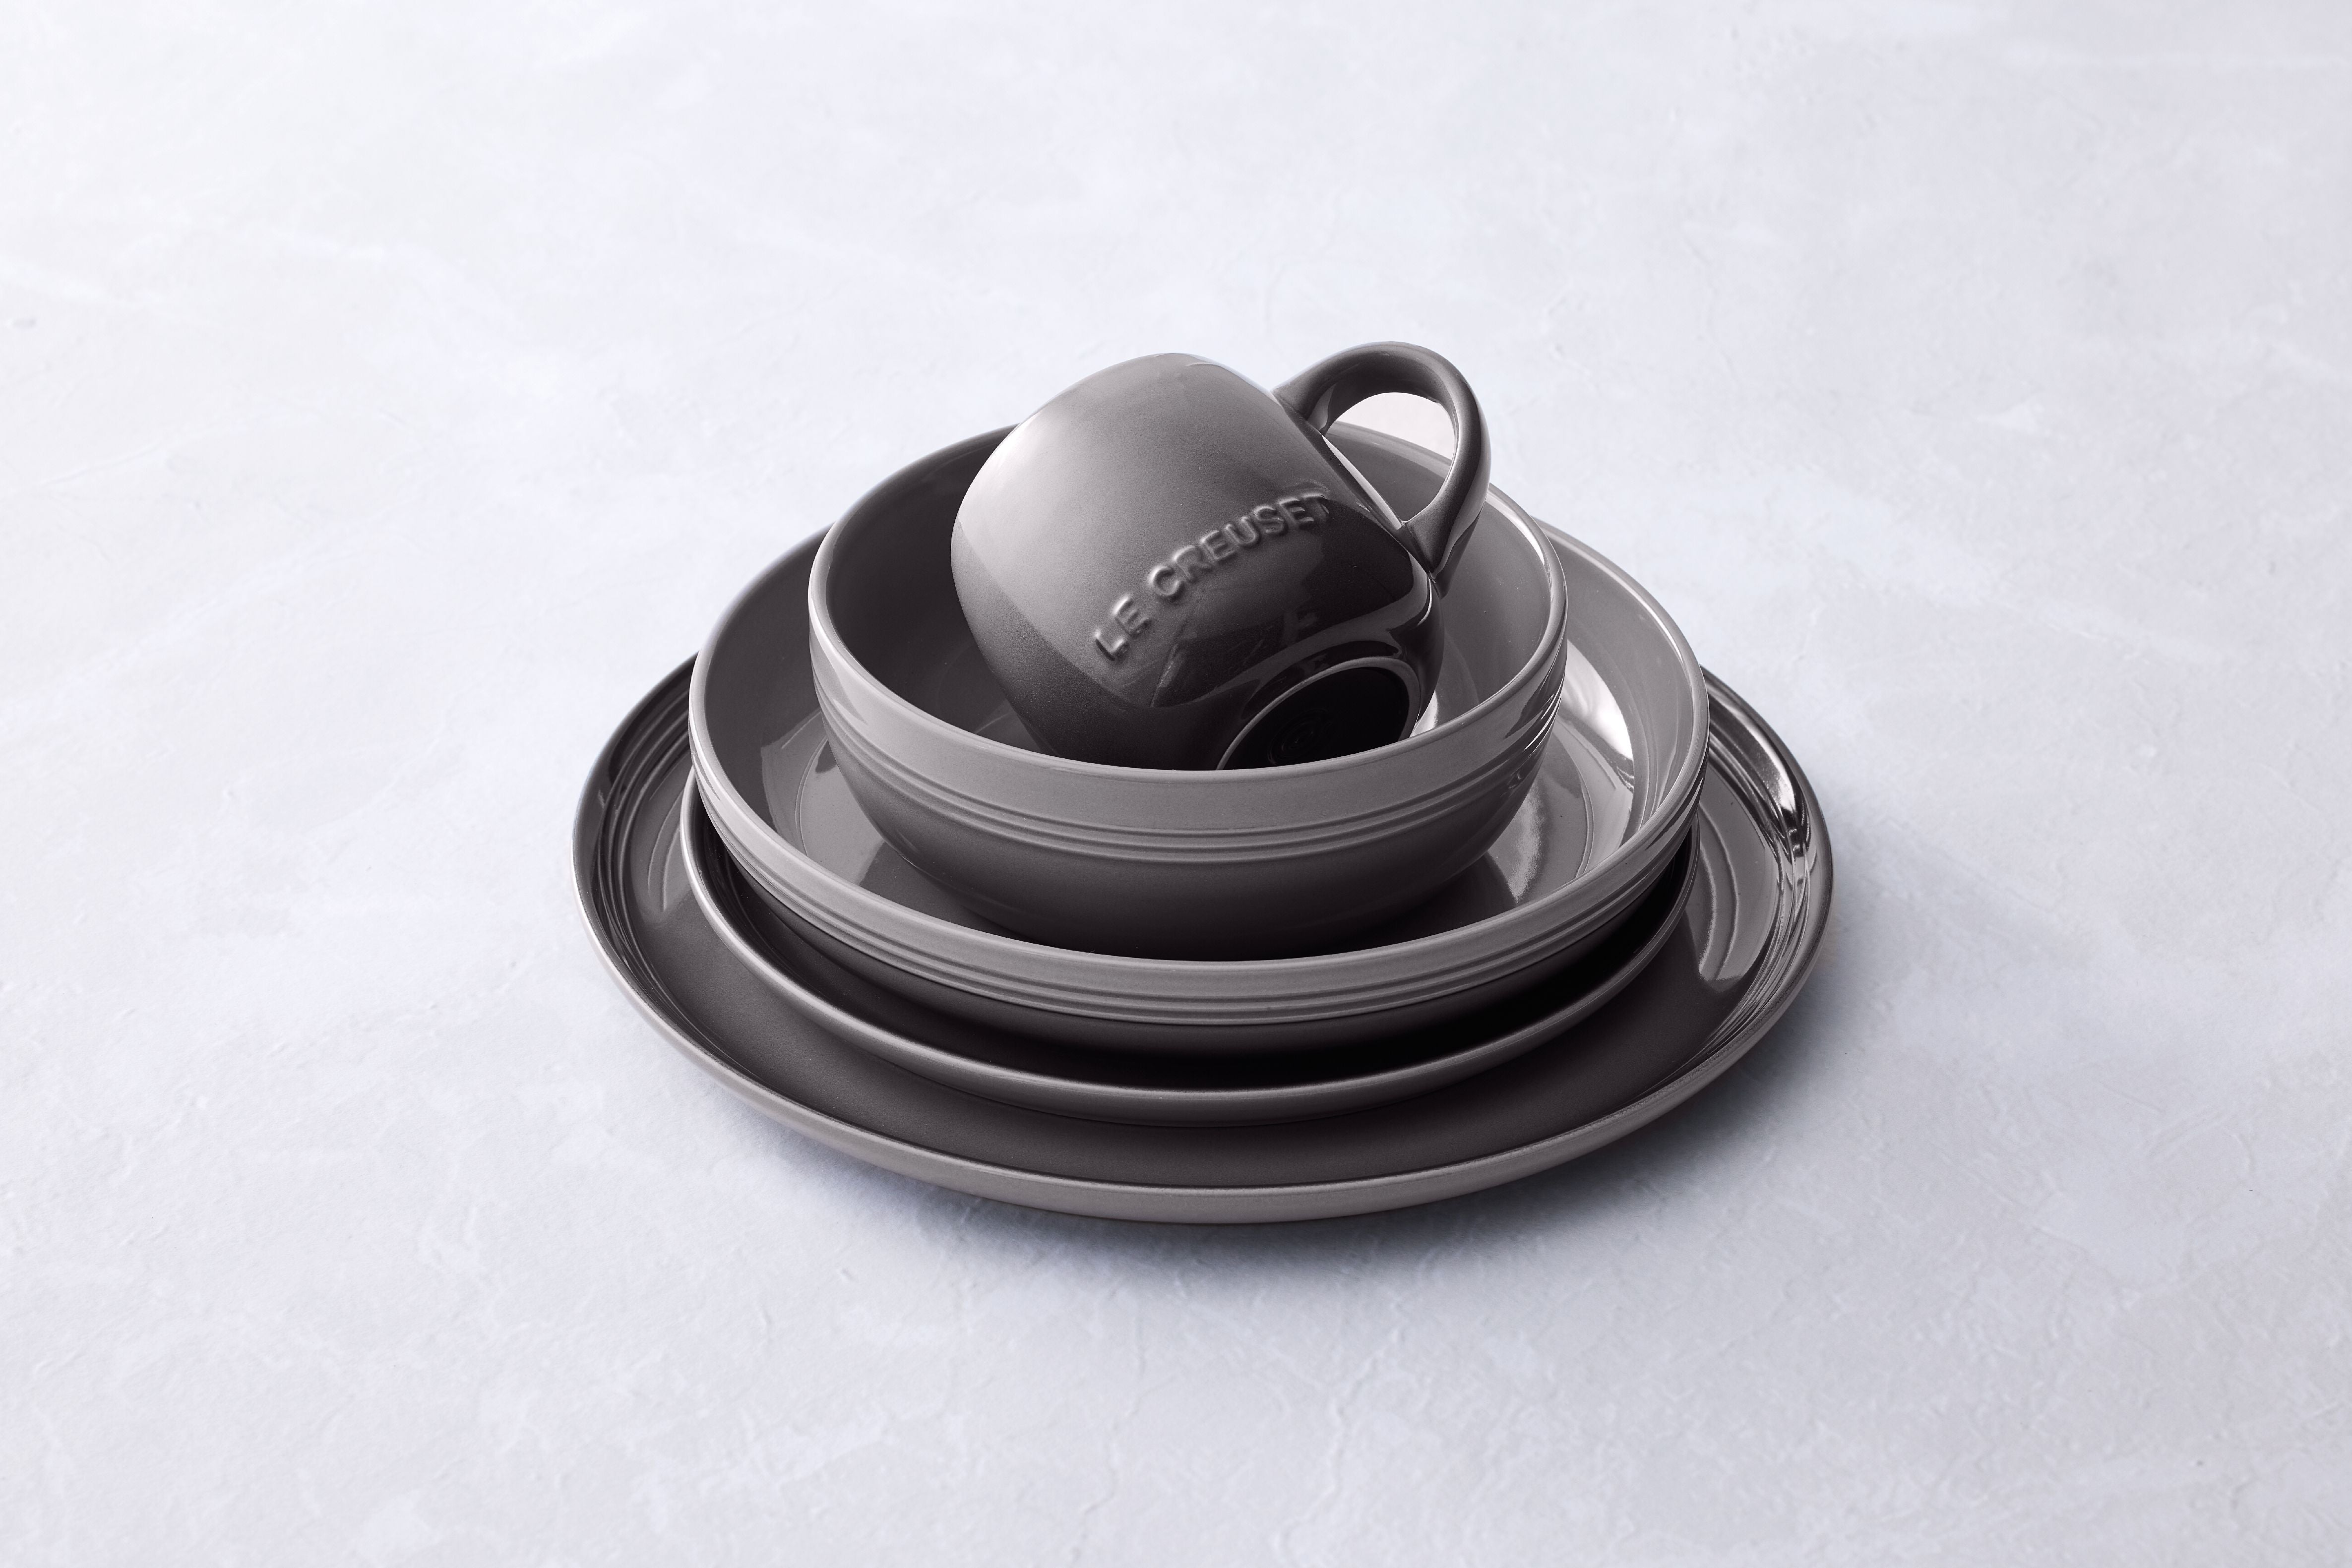 Le creuset coupe sideplade, flint